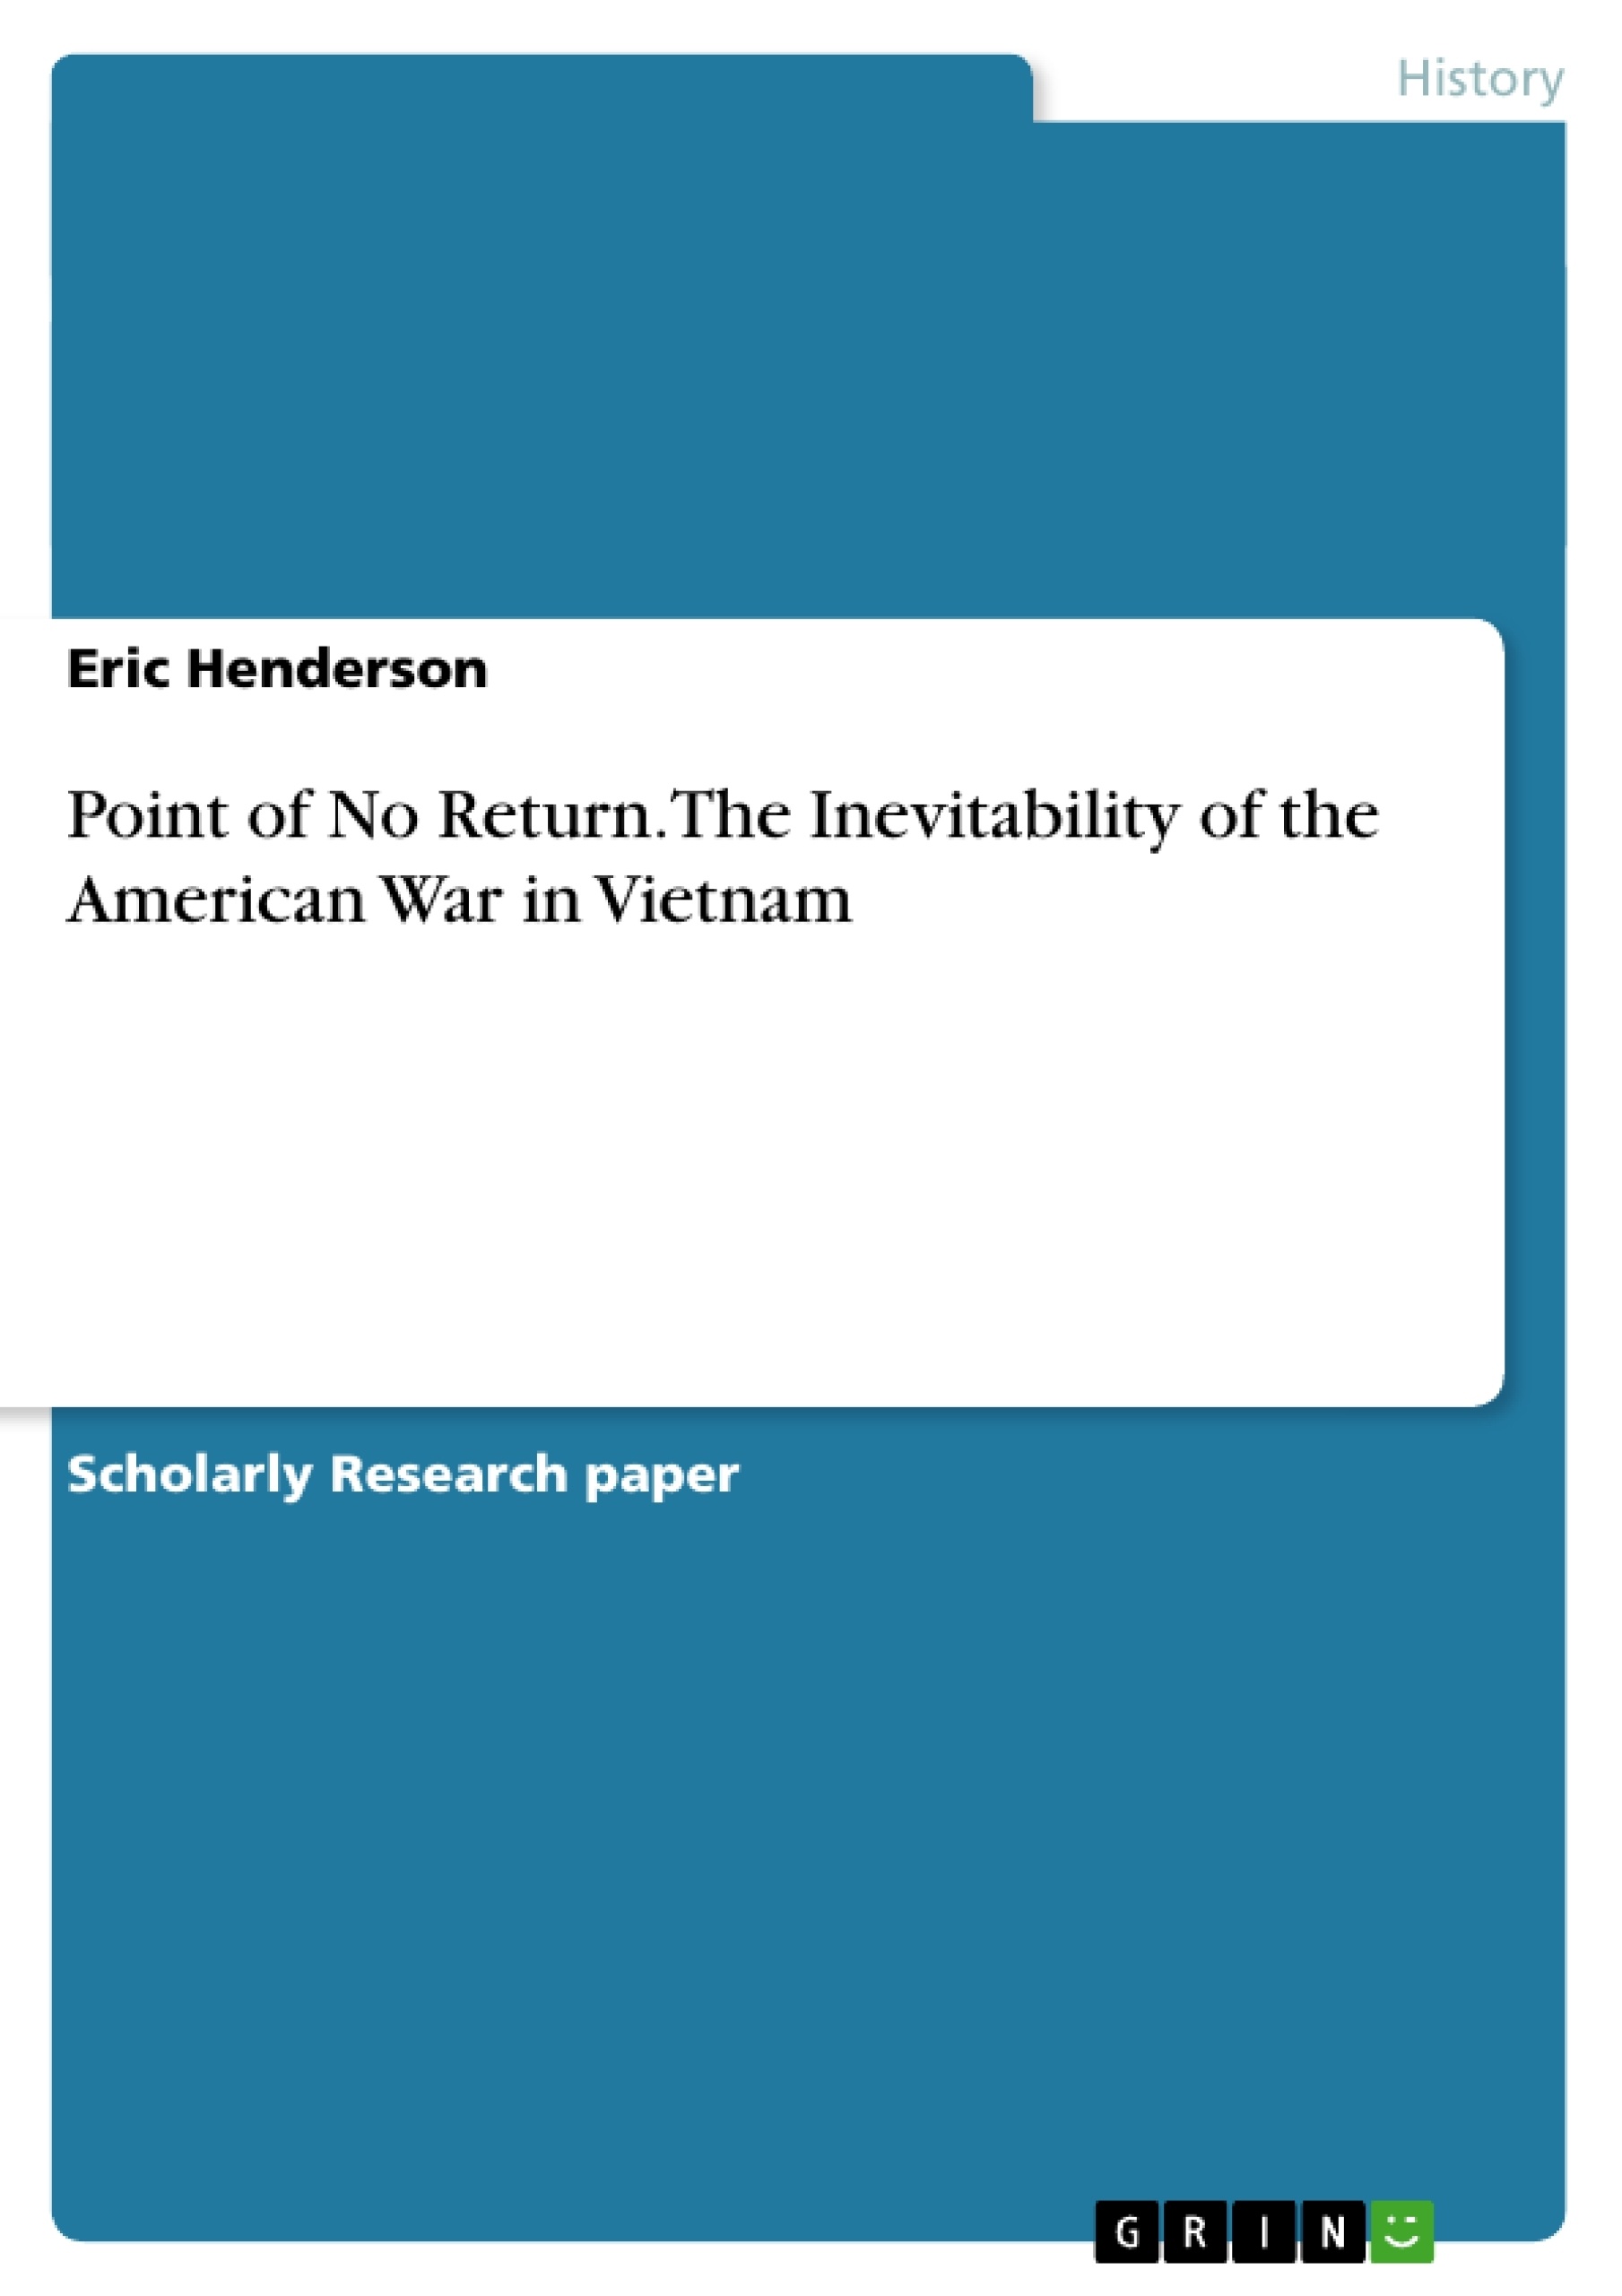 Title: Point of No Return. The Inevitability of the American War in Vietnam